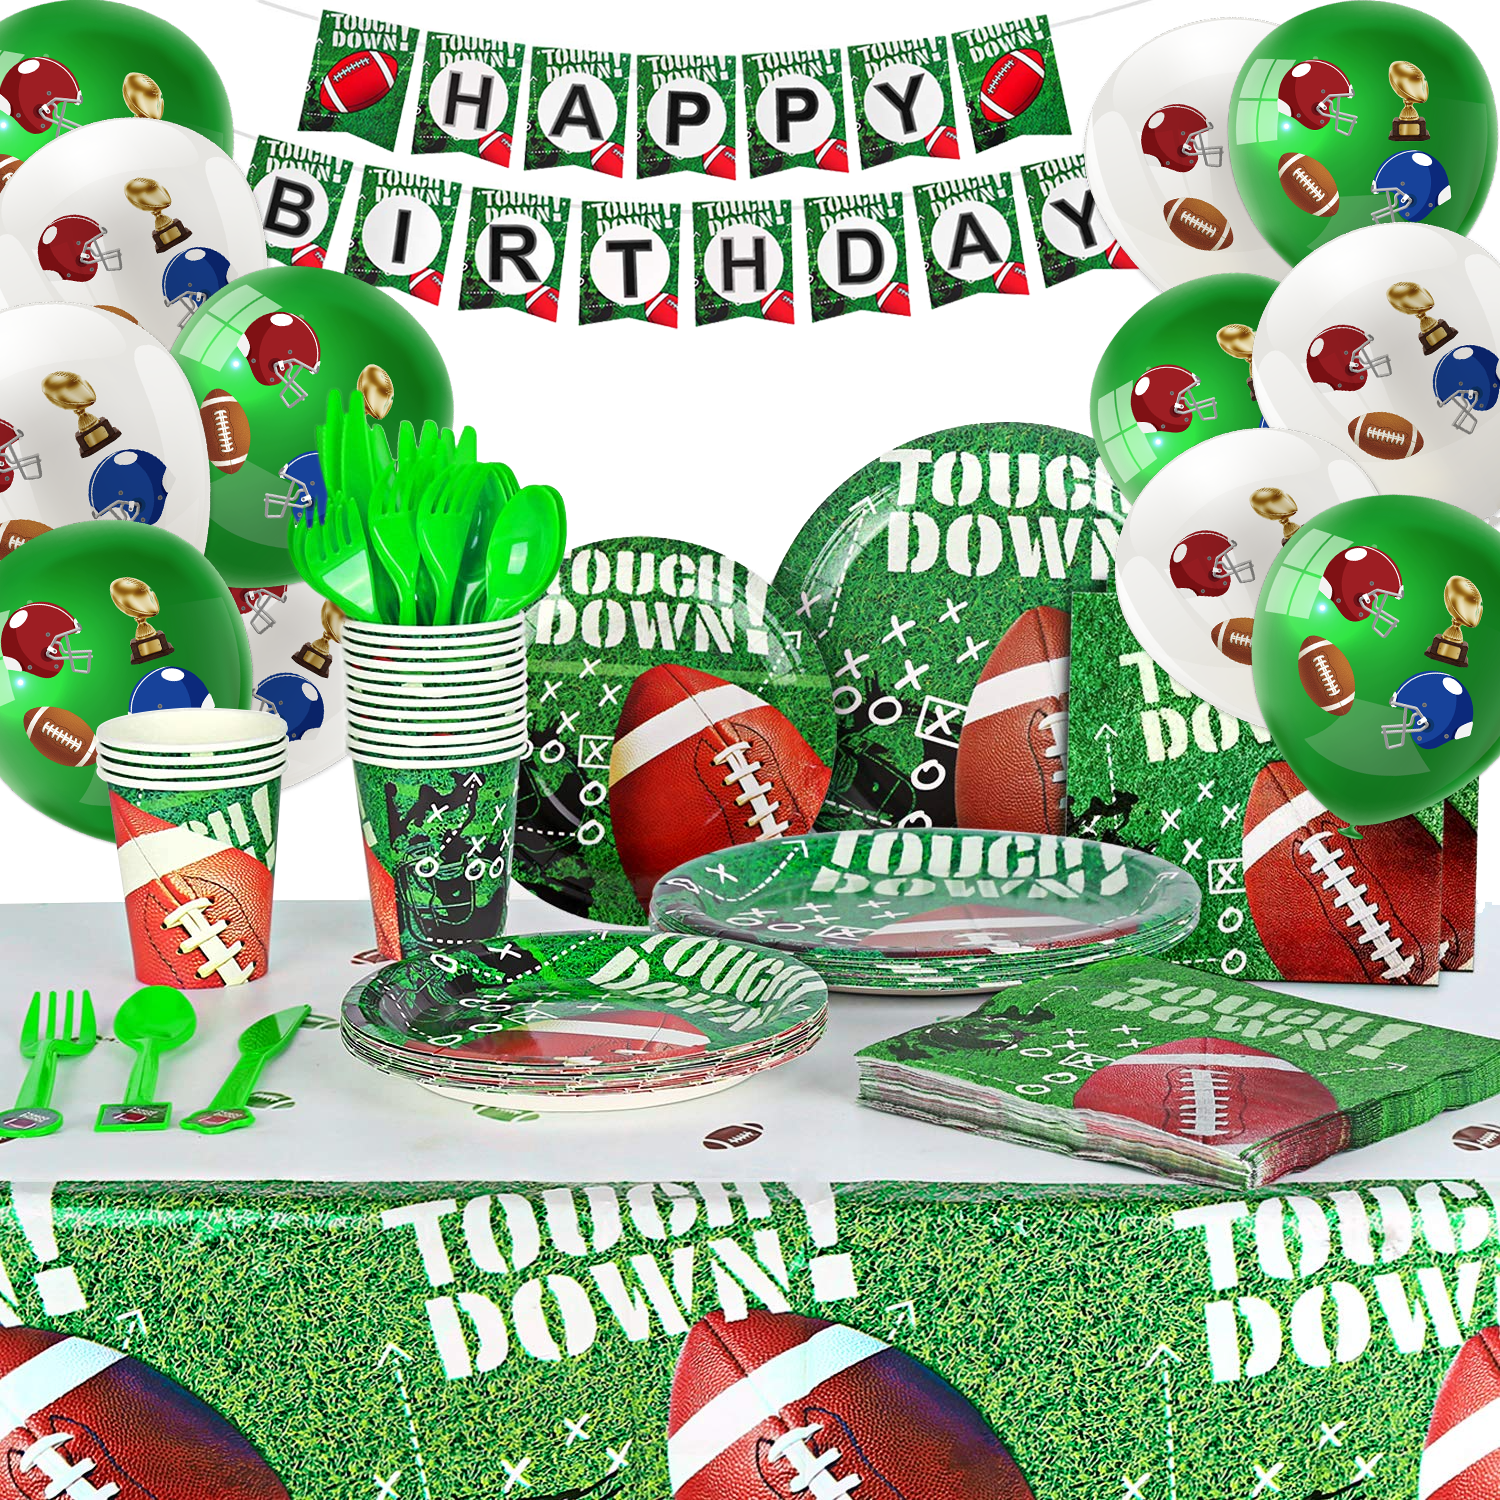 Football Party Supplies Set for 16 Guests, Includes Happy Birthday Banner, Balloons, Plates, Napkins, Spoons, Cups, Tablecloth for Kids Birthday Party Decorations